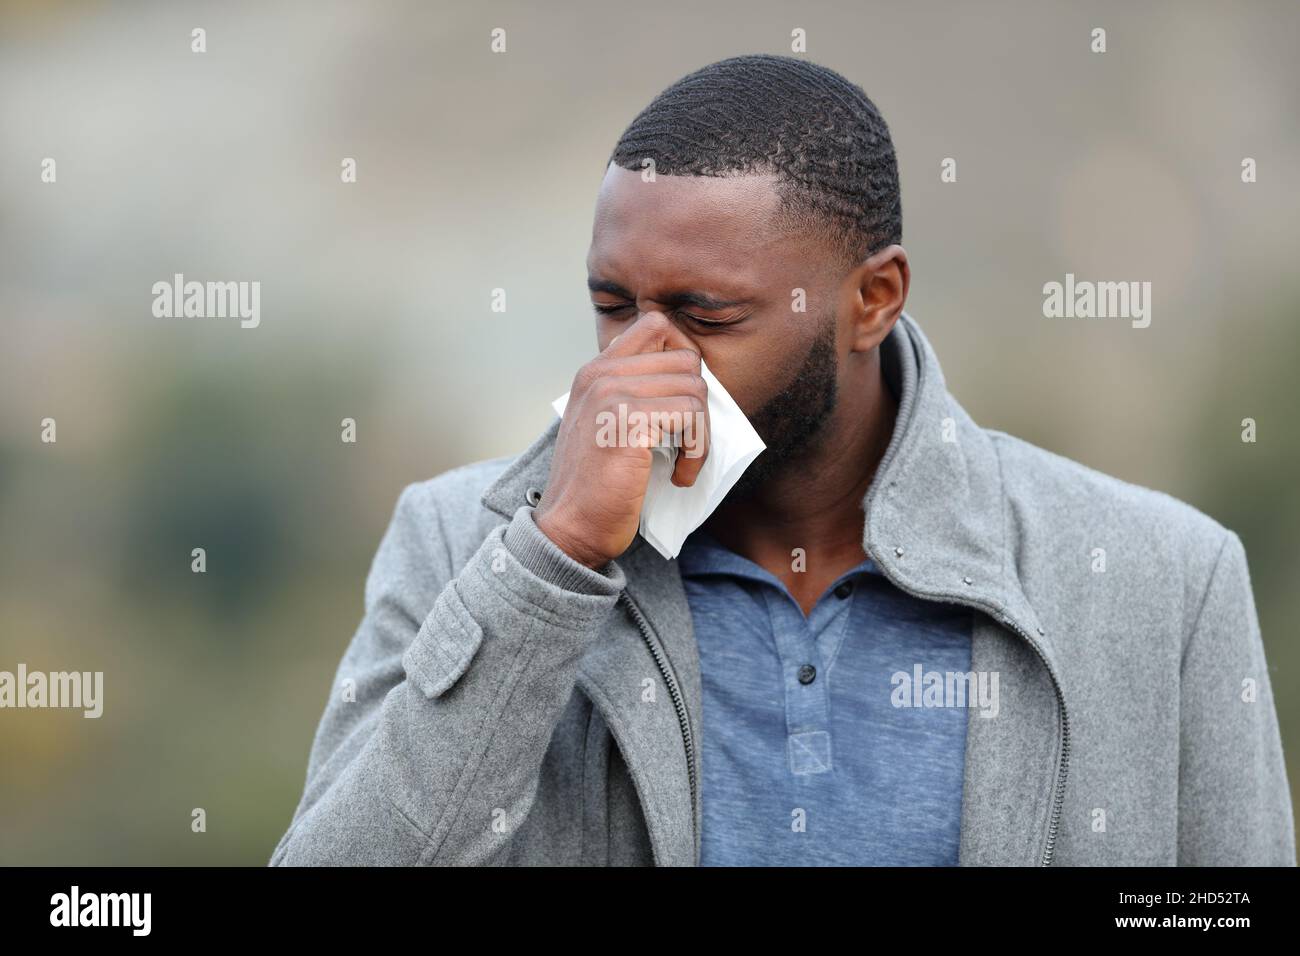 Sick guy with black skin blowing on tissue outdoors in winter Stock Photo